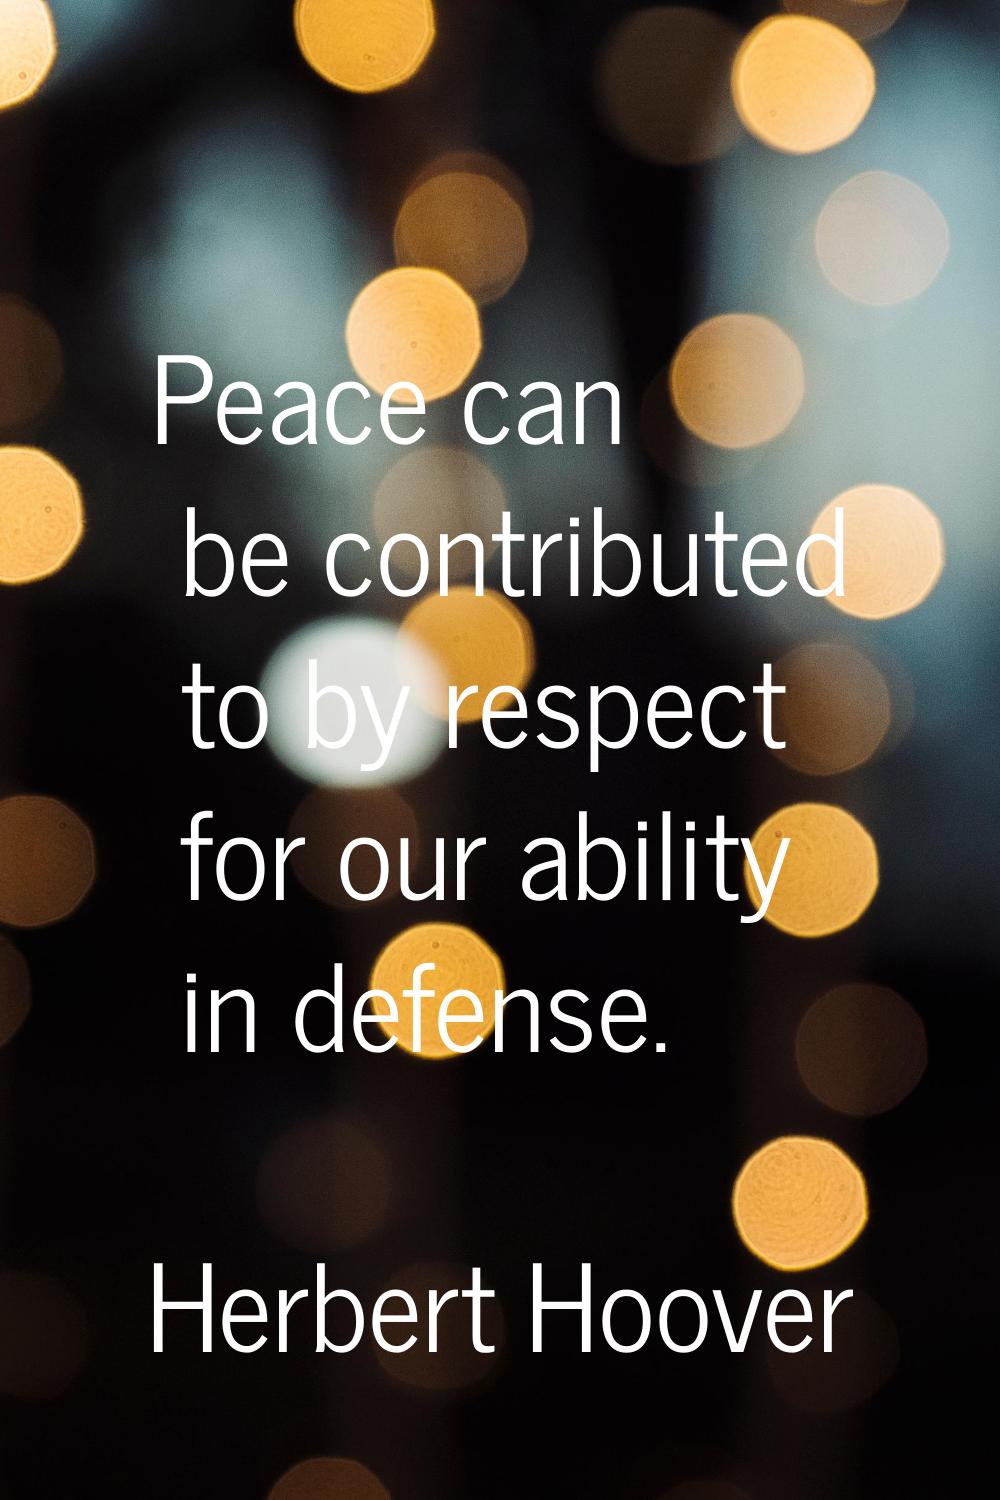 Peace can be contributed to by respect for our ability in defense.